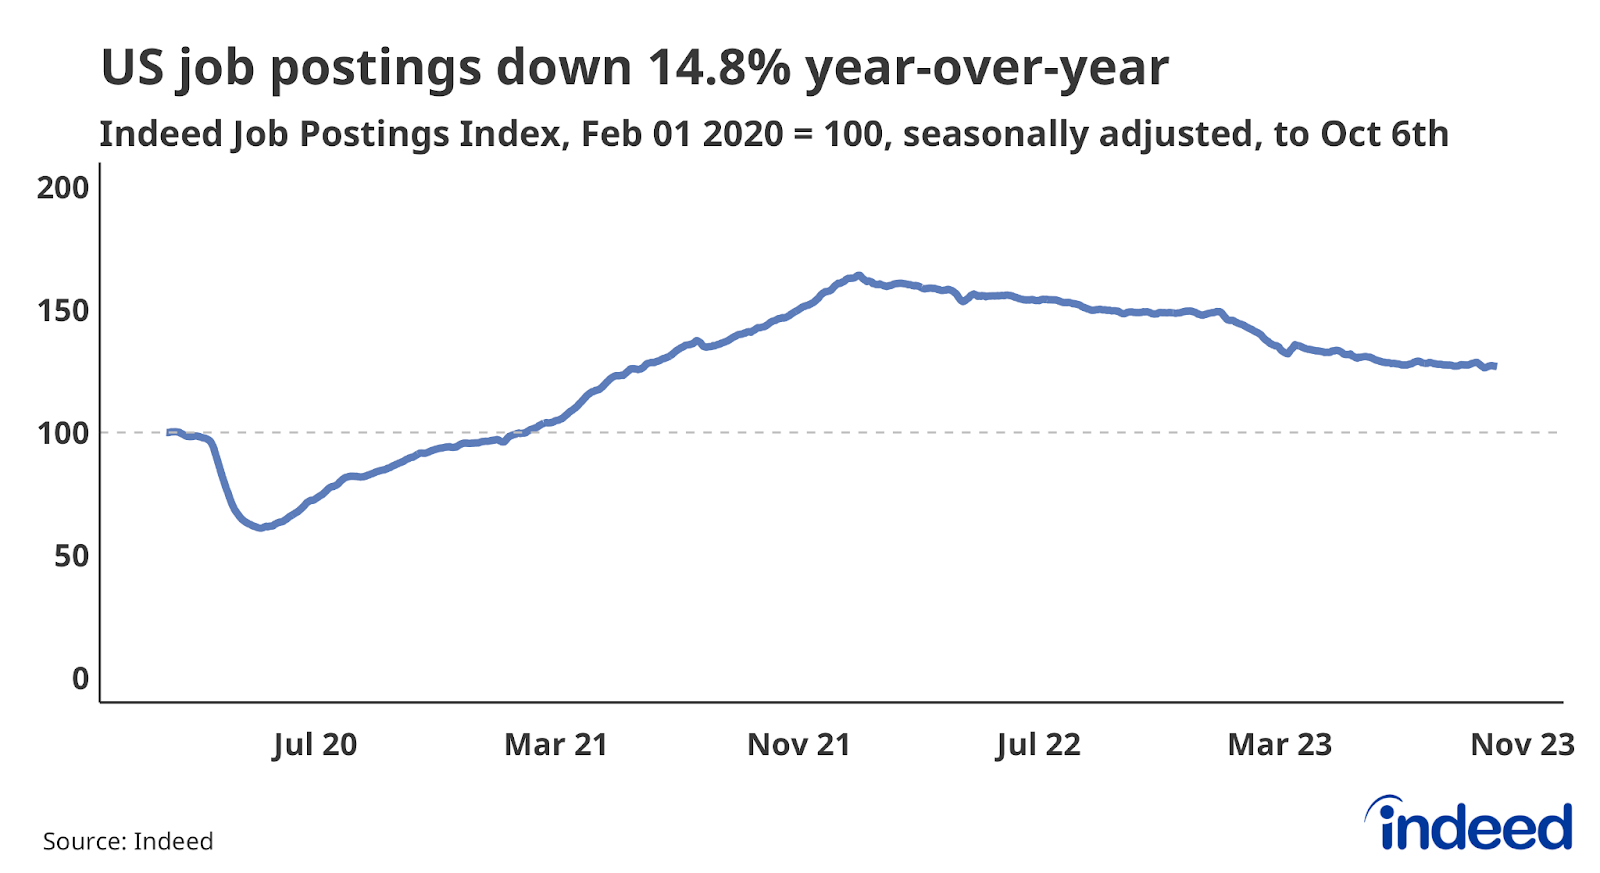 Line graph titled “US job postings down 14.8% year-over-year,” shows the increase of Indeed job postings from their pre-pandemic baseline. US job postings have fallen 14.8% since October 6, 2022.